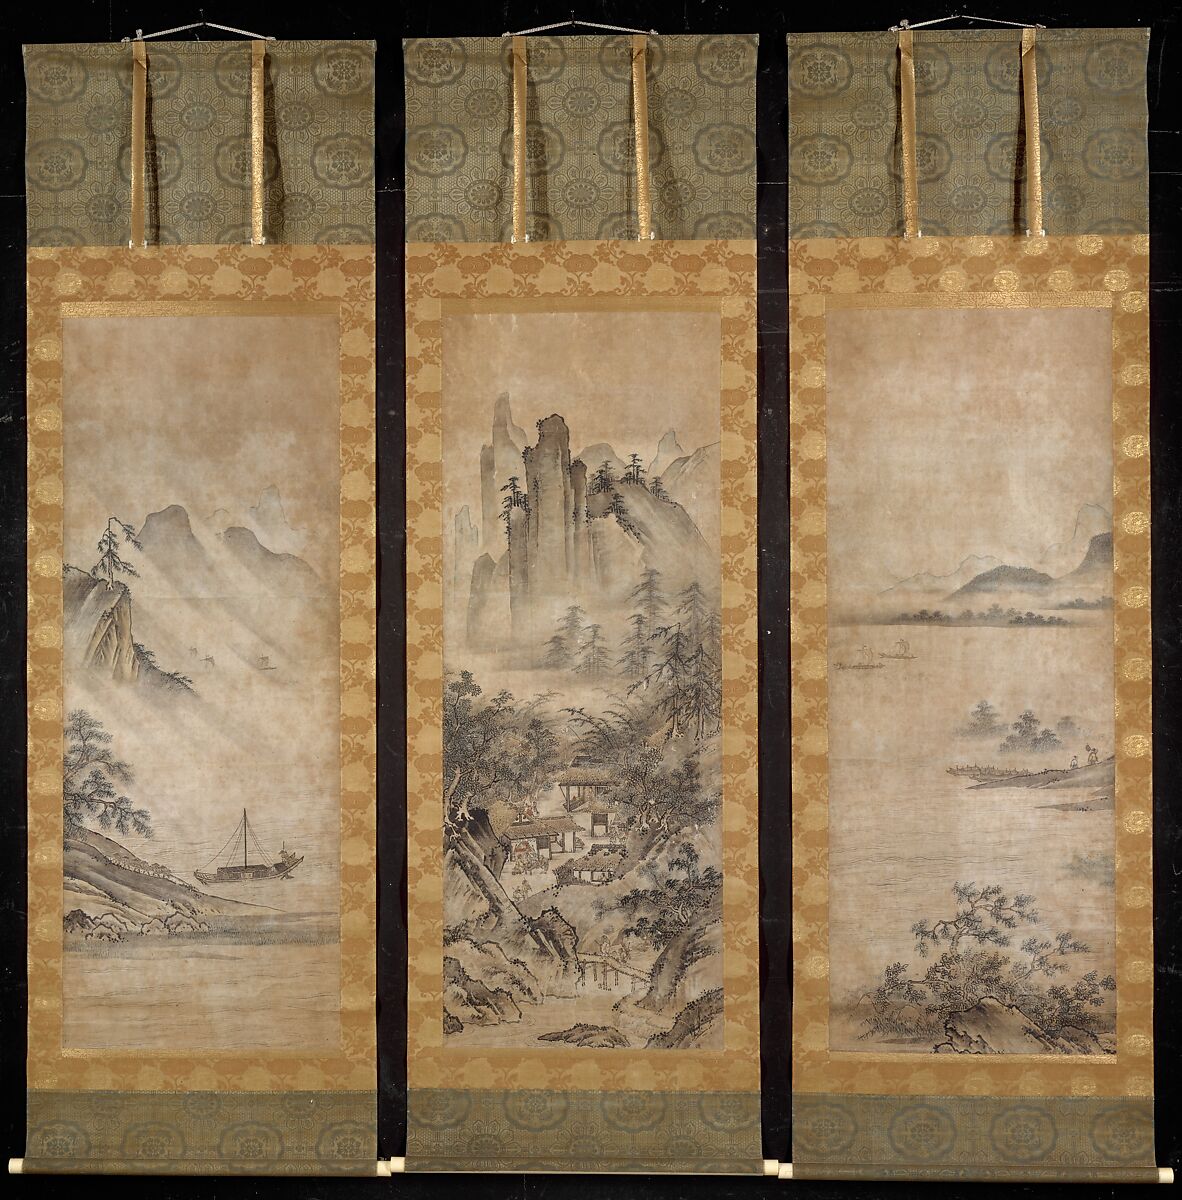 Eight Views of the Xiao and Xiang Rivers, Hanging scroll; ink and color on paper, Japan 